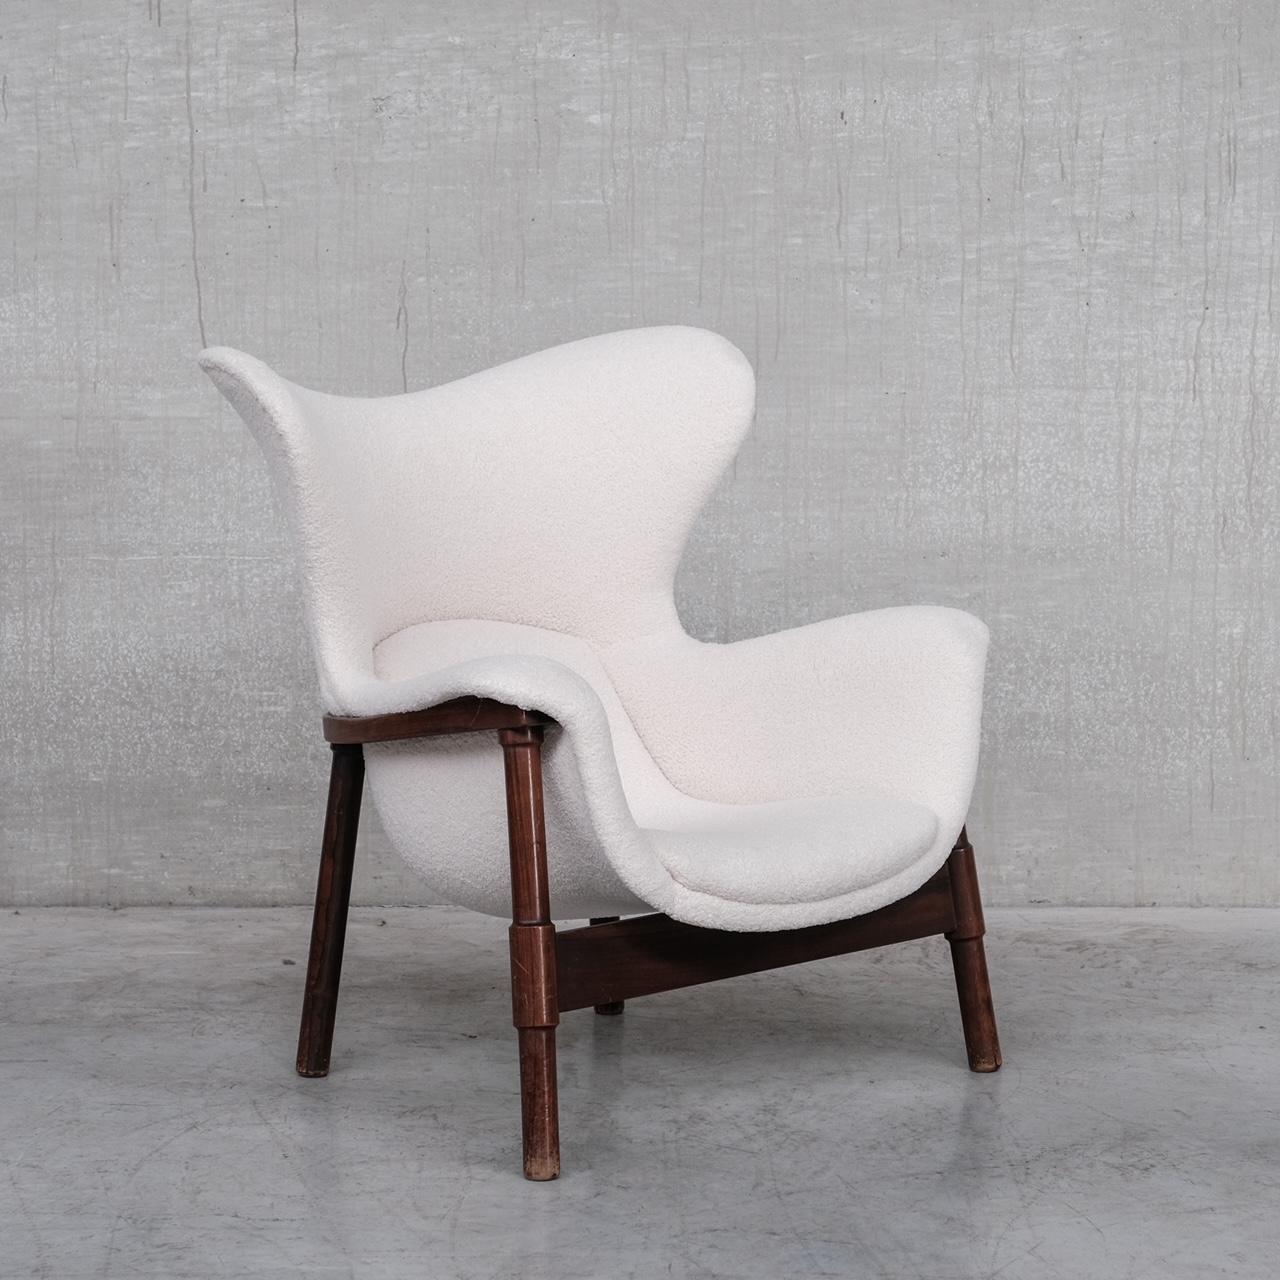 A generous mid-20th century armchair. 

Italy, c1960s. 

Re-upholstered in a white boucle style fabric, a pleasing contrast to the wooden frame. 

Anonymous designer, but one of the best armchairs we have managed to source. 

Location: